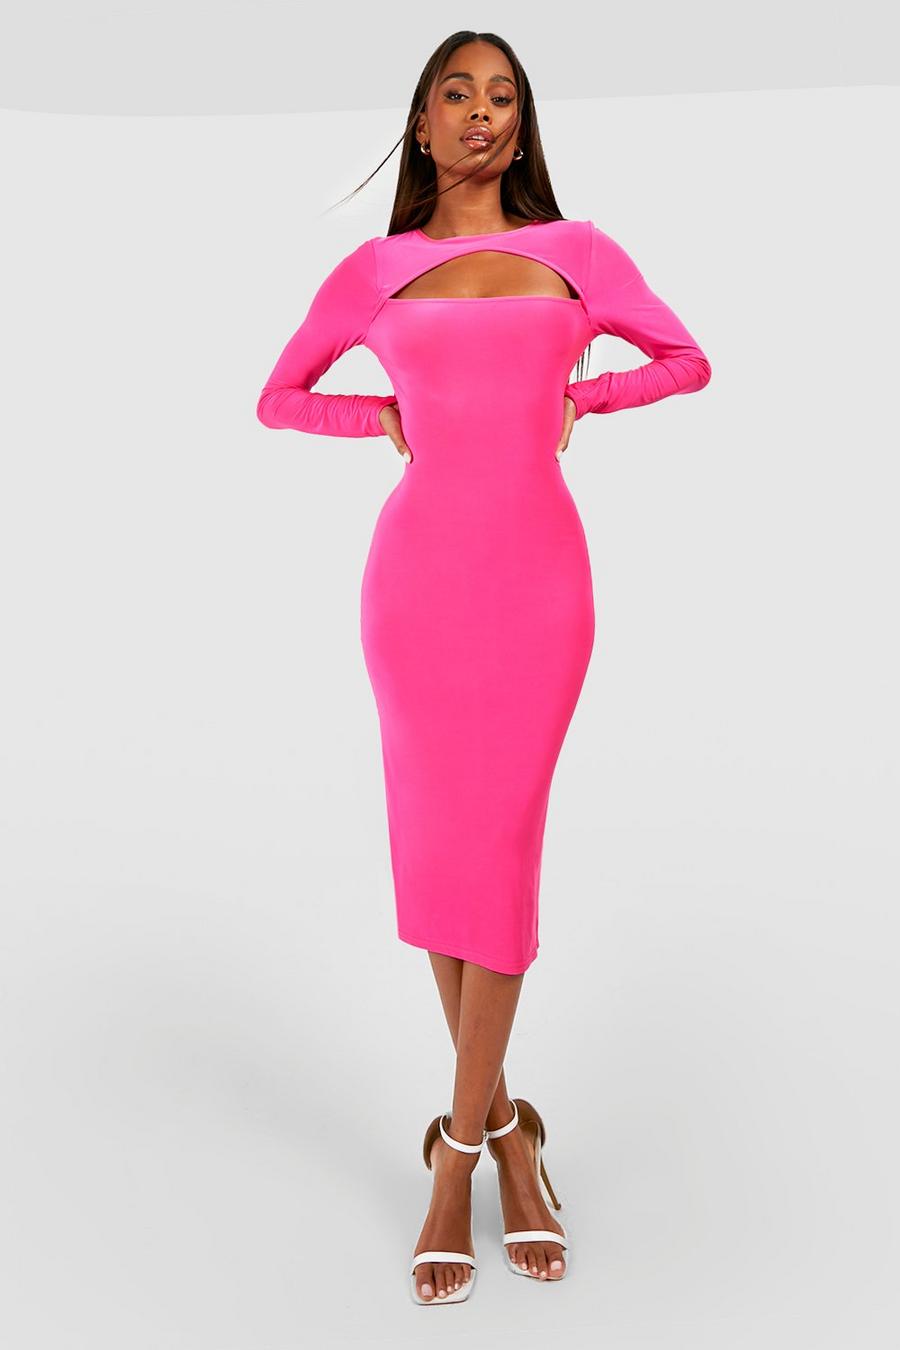 Premium Heavy Weight Slinky Cut Out Long Sleeve Midi Dress, Hot pink rosa